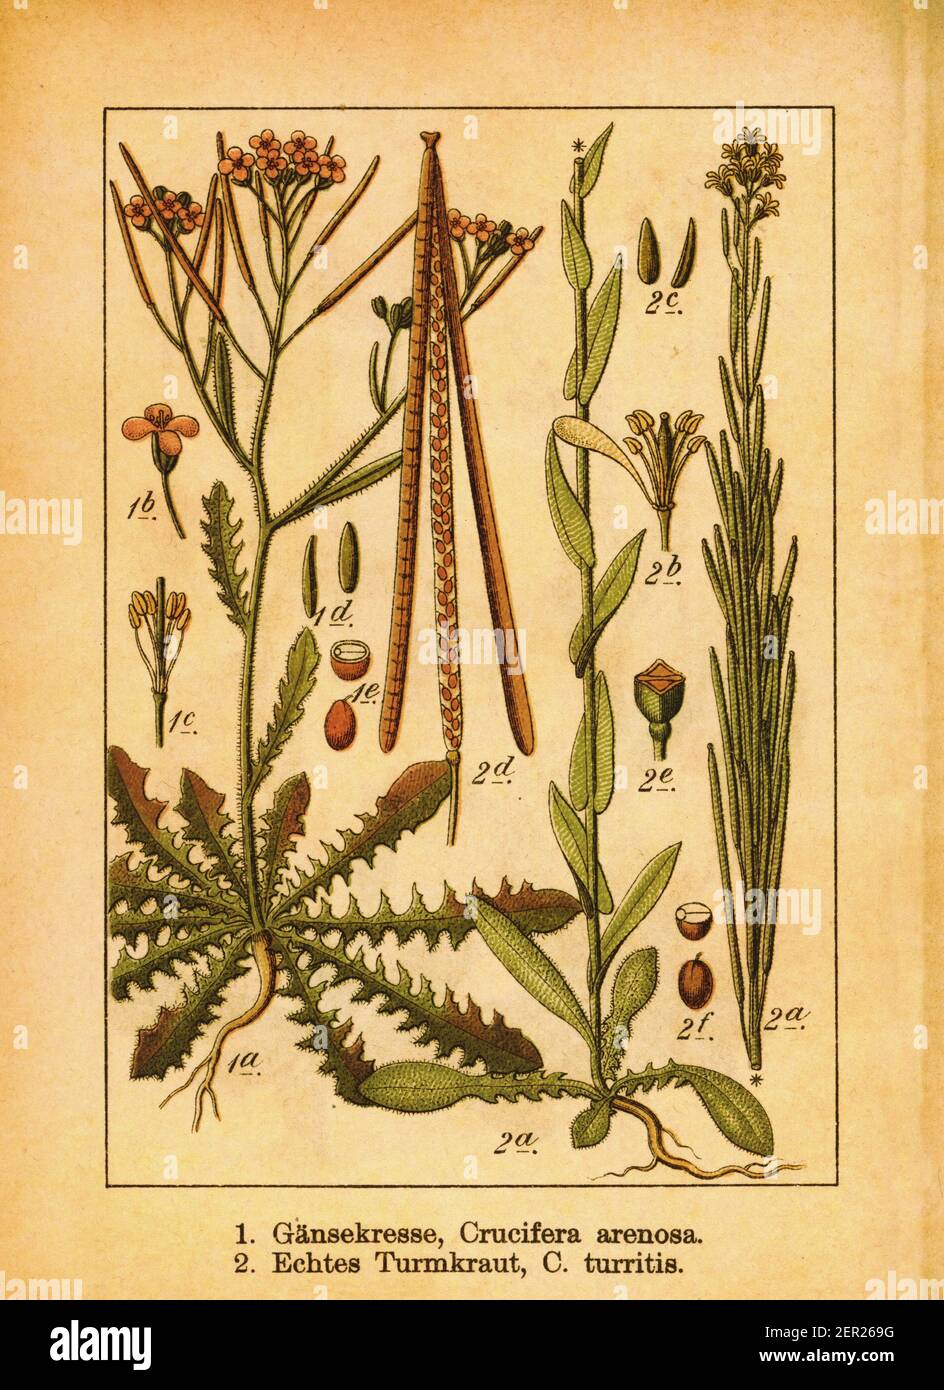 19th-century illustration of Arabidopsis arenosa and tower mustard. Engraving by Jacob Sturm (1771-1848) from the book Deutschlands Flora in Abbildung Stock Photo